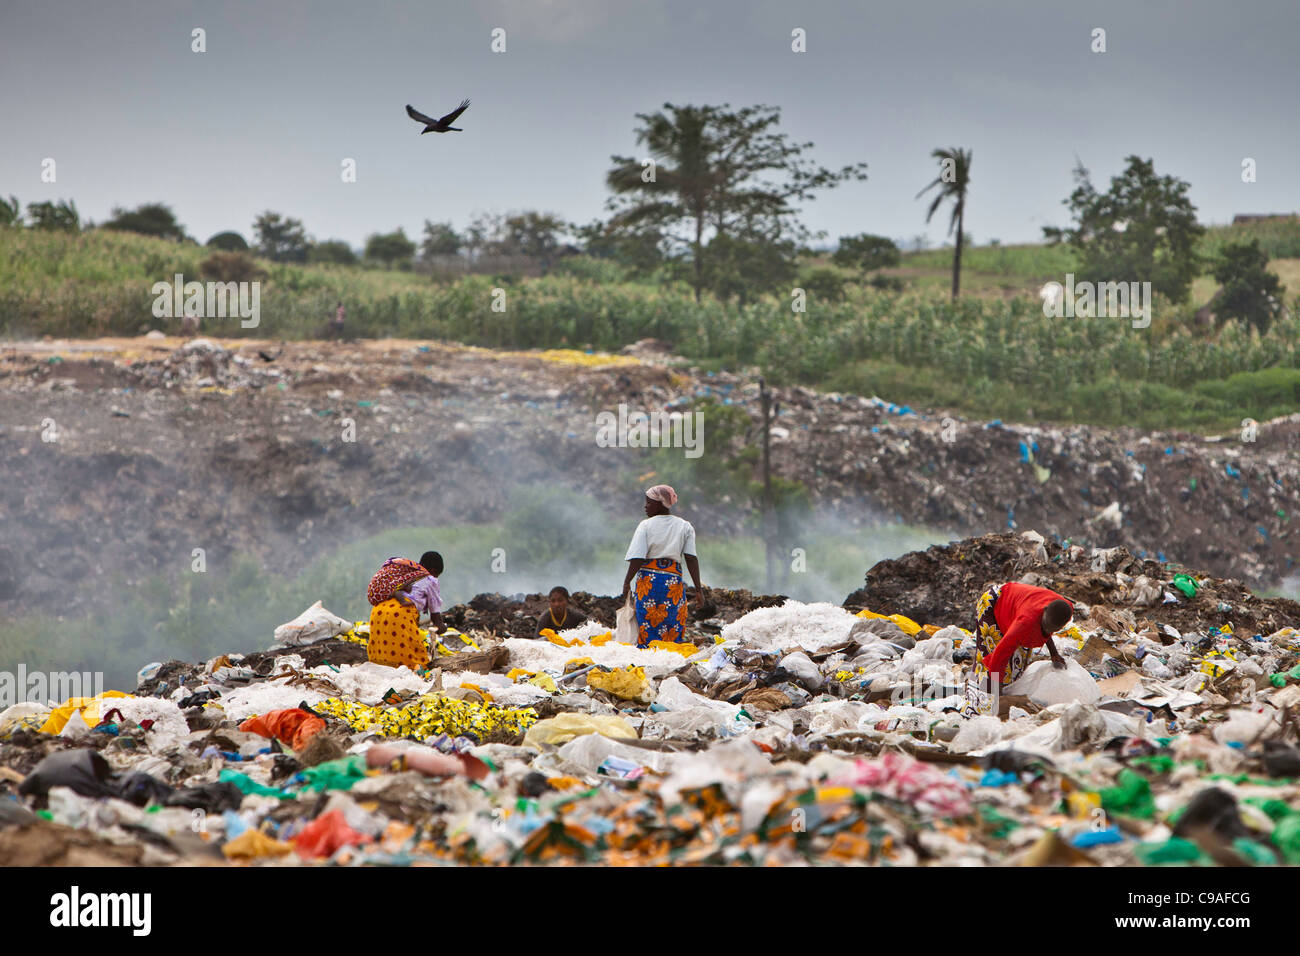 One of the main rubbish dump sites for Mombasa, Kenya. Many children can be found collecting metals and plastic. Stock Photo